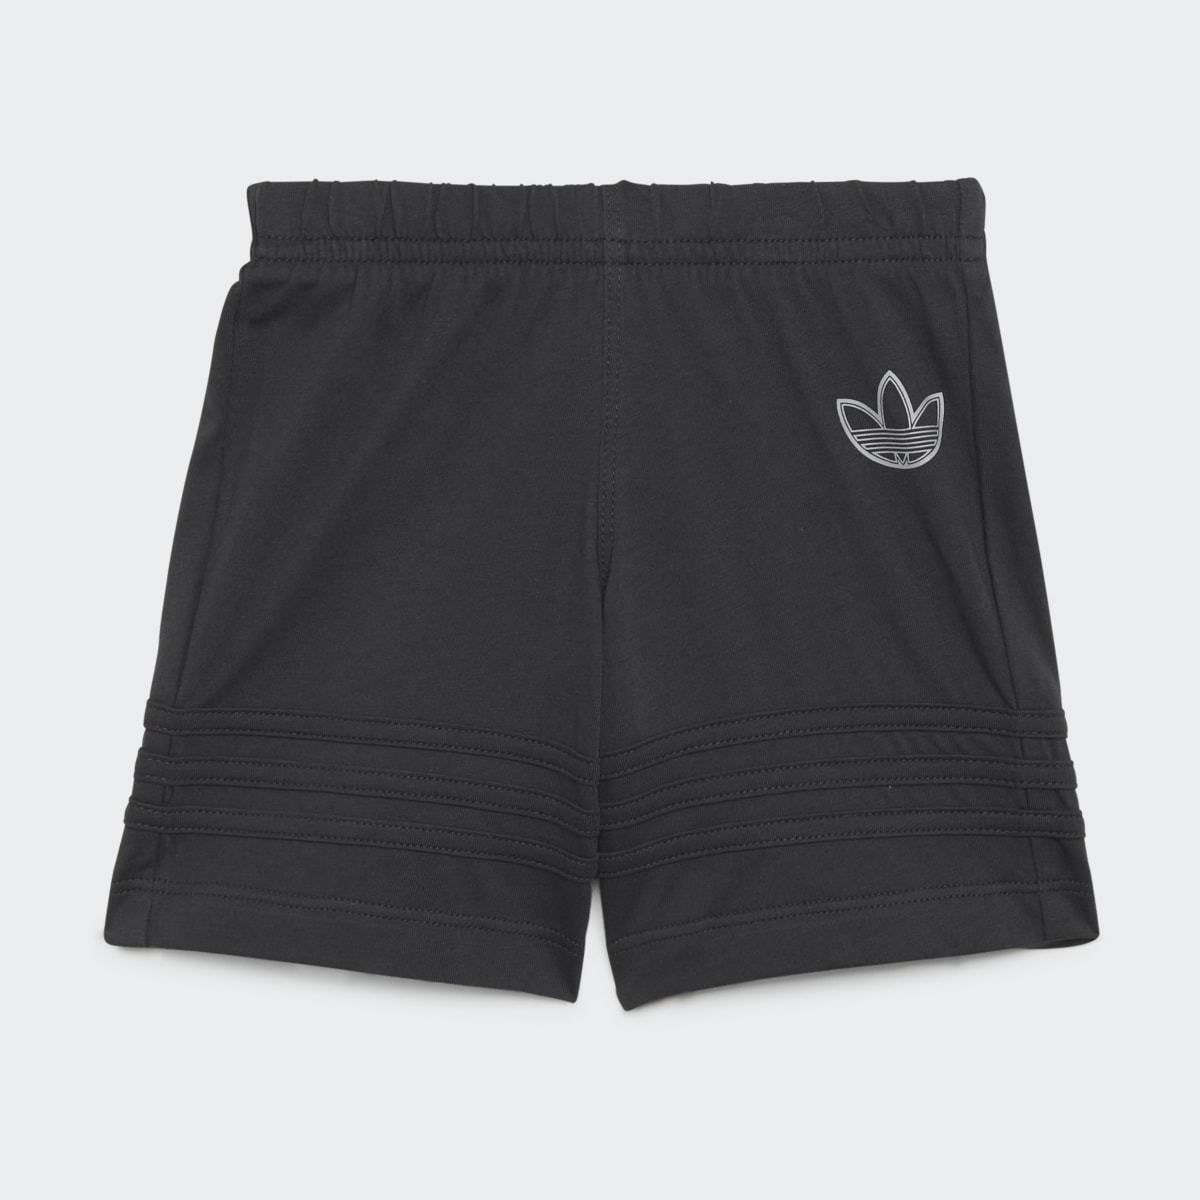 Adidas SPRT Collection Shorts and Tee Set. 5